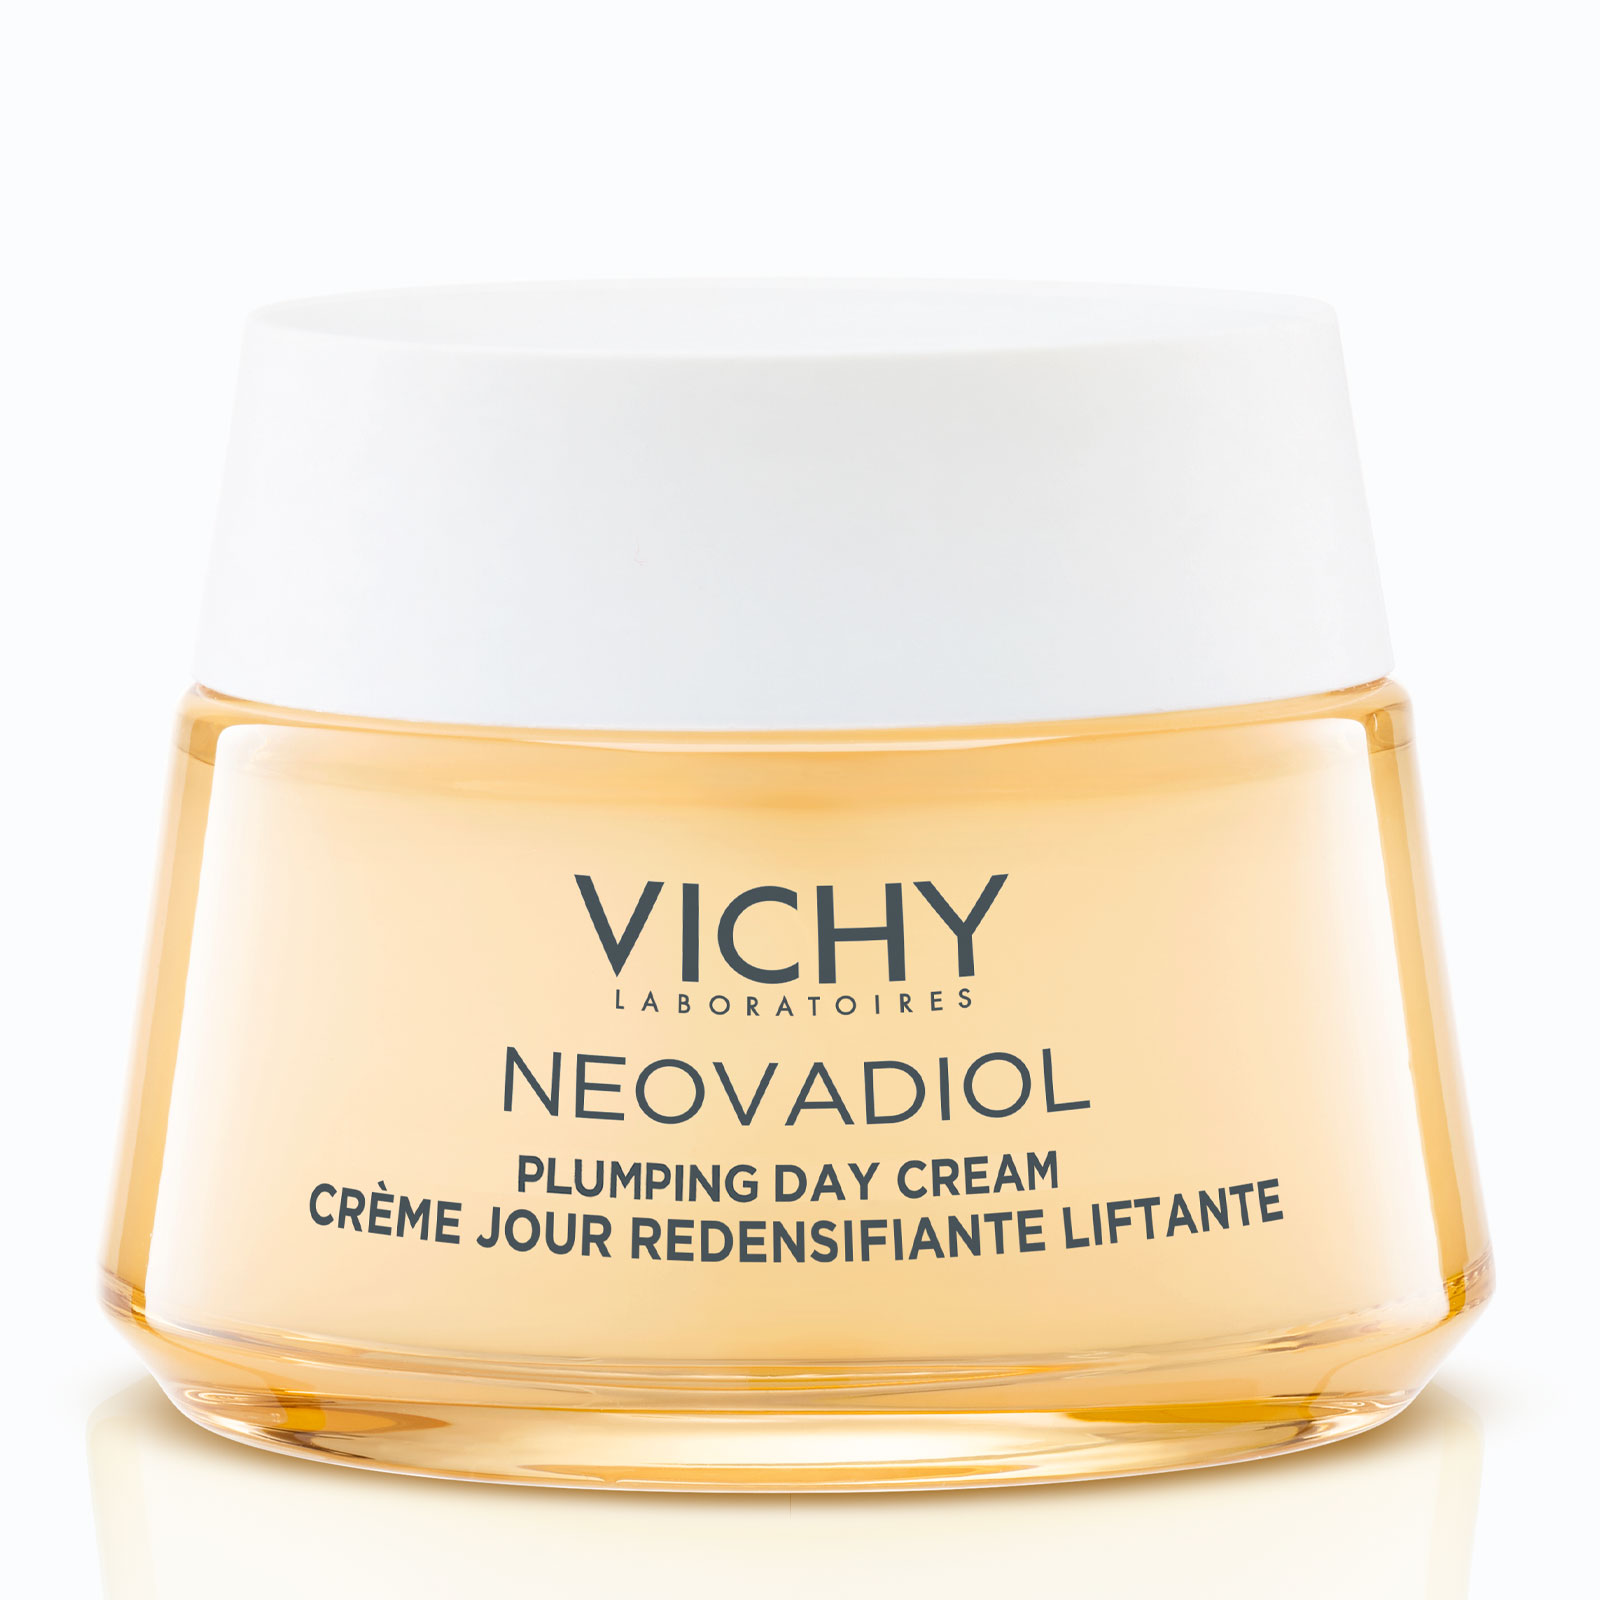 Vichy Neovadiol Plumping Day Cream for Dry Skin 50ml